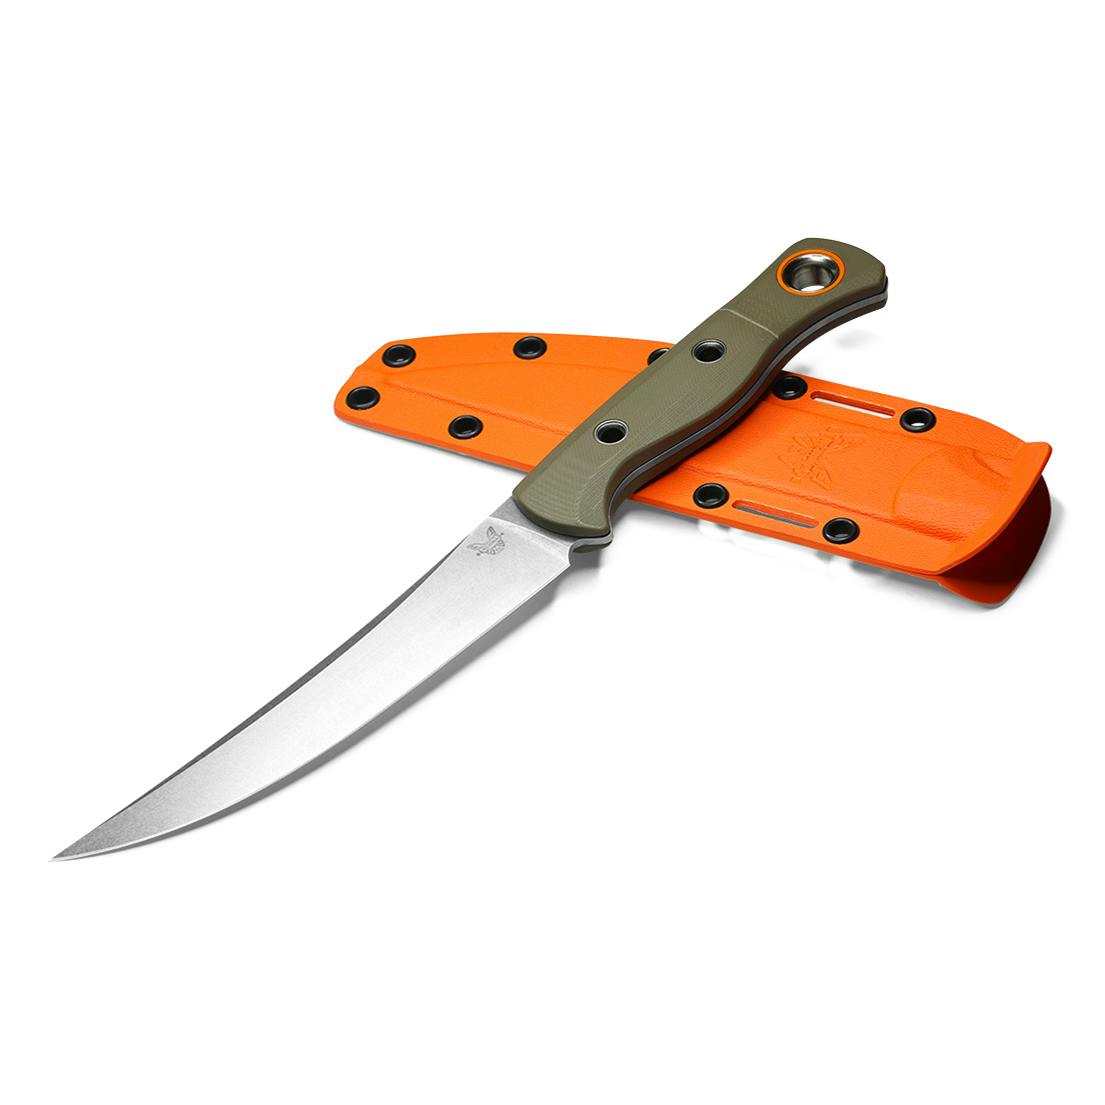 Meatcrafter Camp Knife